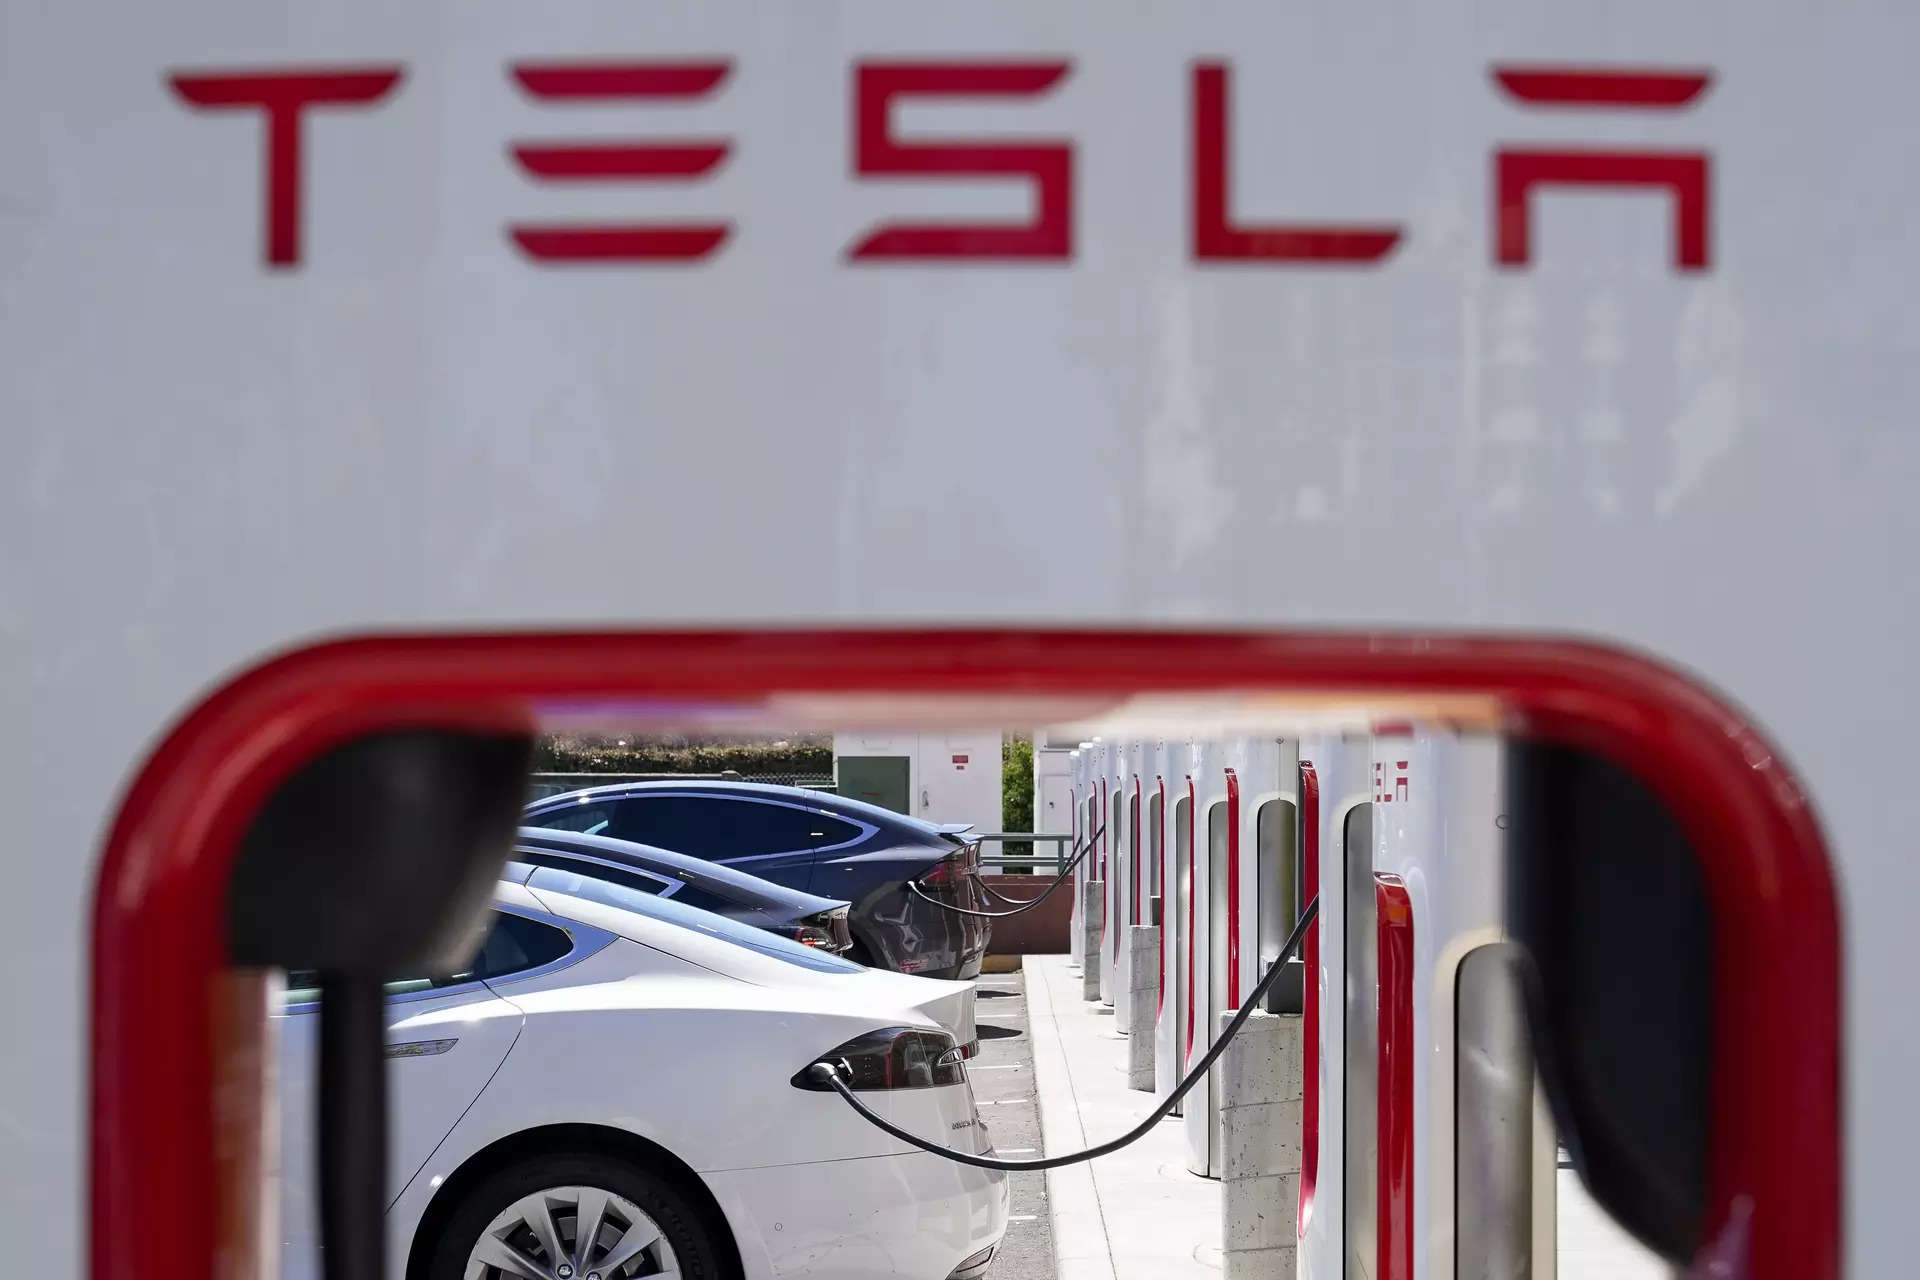 <p>The union said it intended to send a "clear signal to Tesla" and do what was necessary to ensure that any vehicle shipments via Norway to Sweden were blocked.</p>